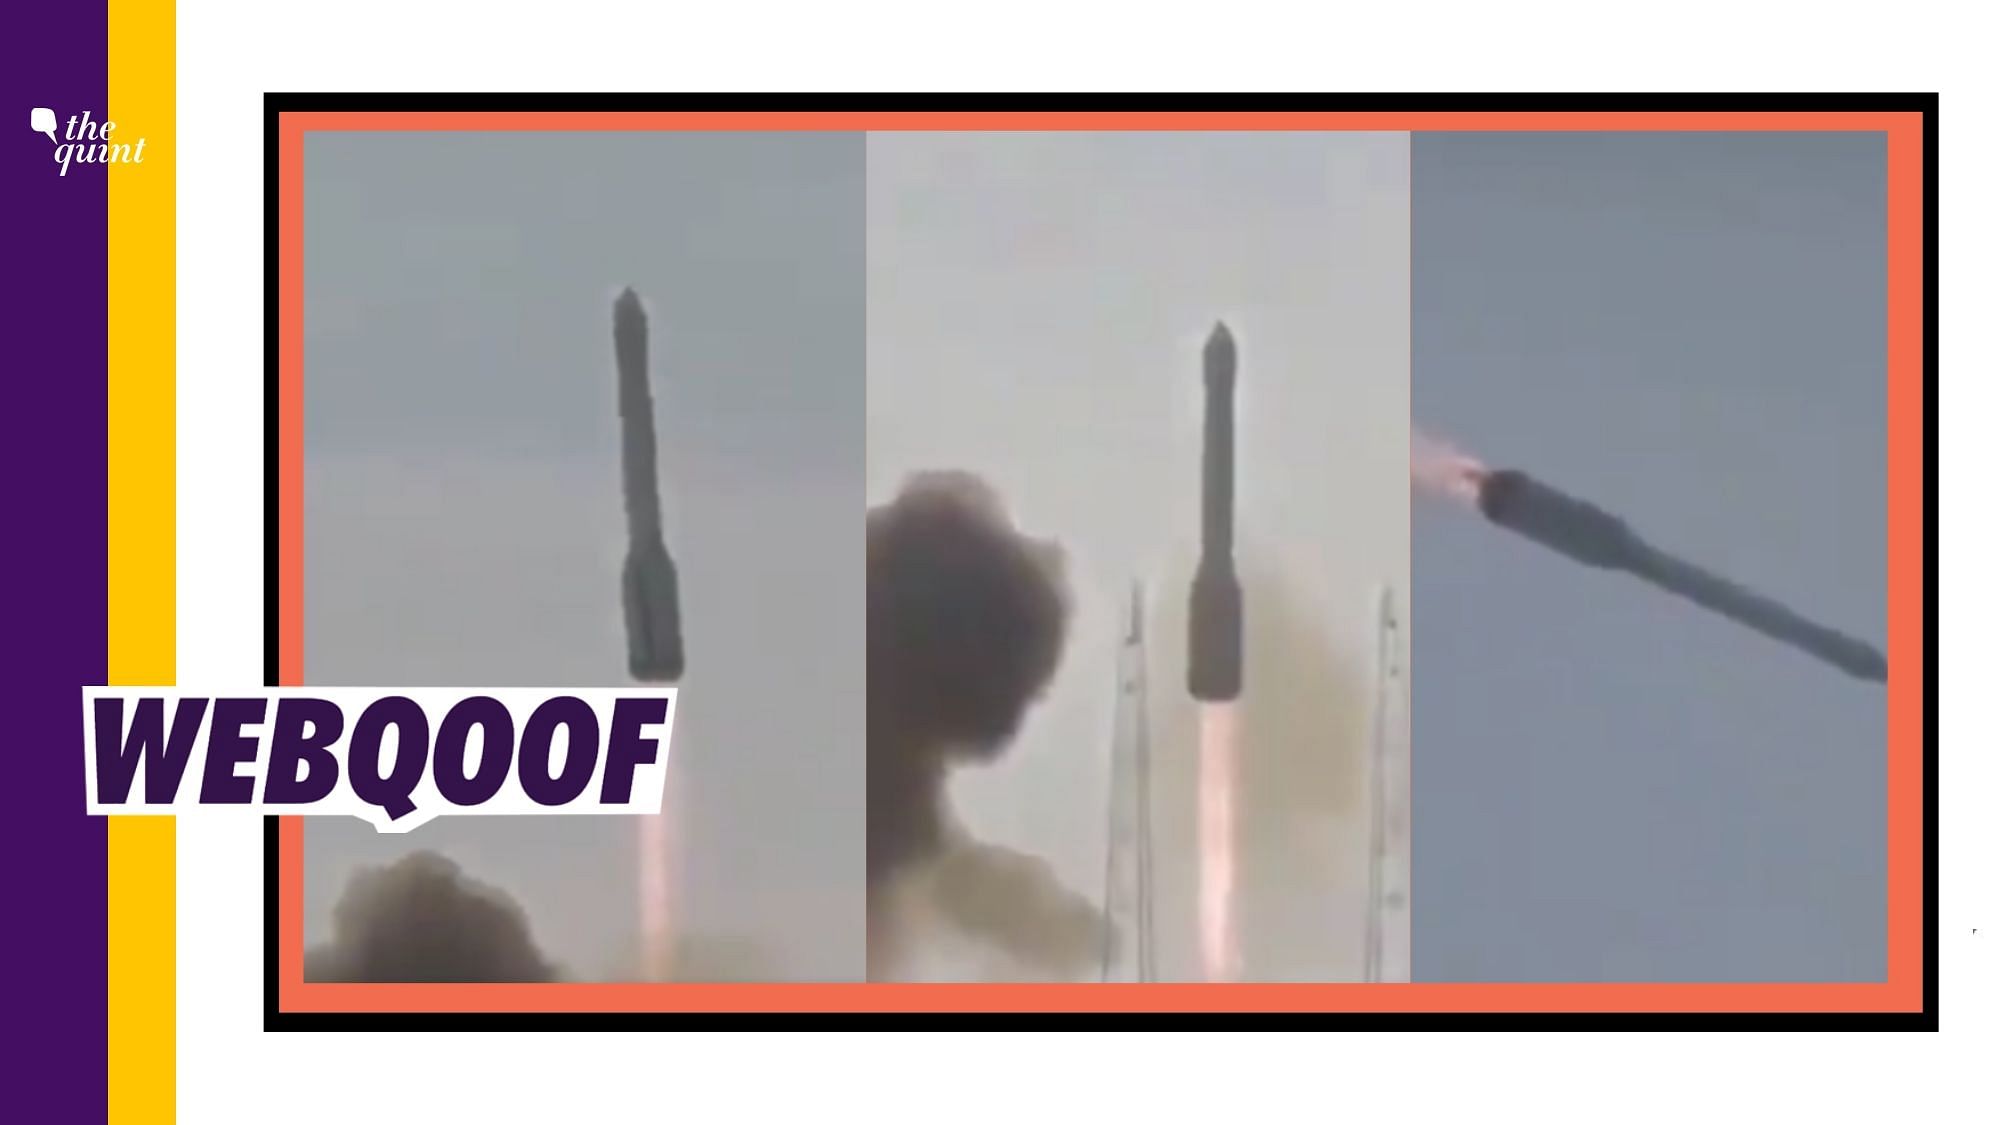 An old and unrelated video of a rocket crash is being falsely claimed to be from India.